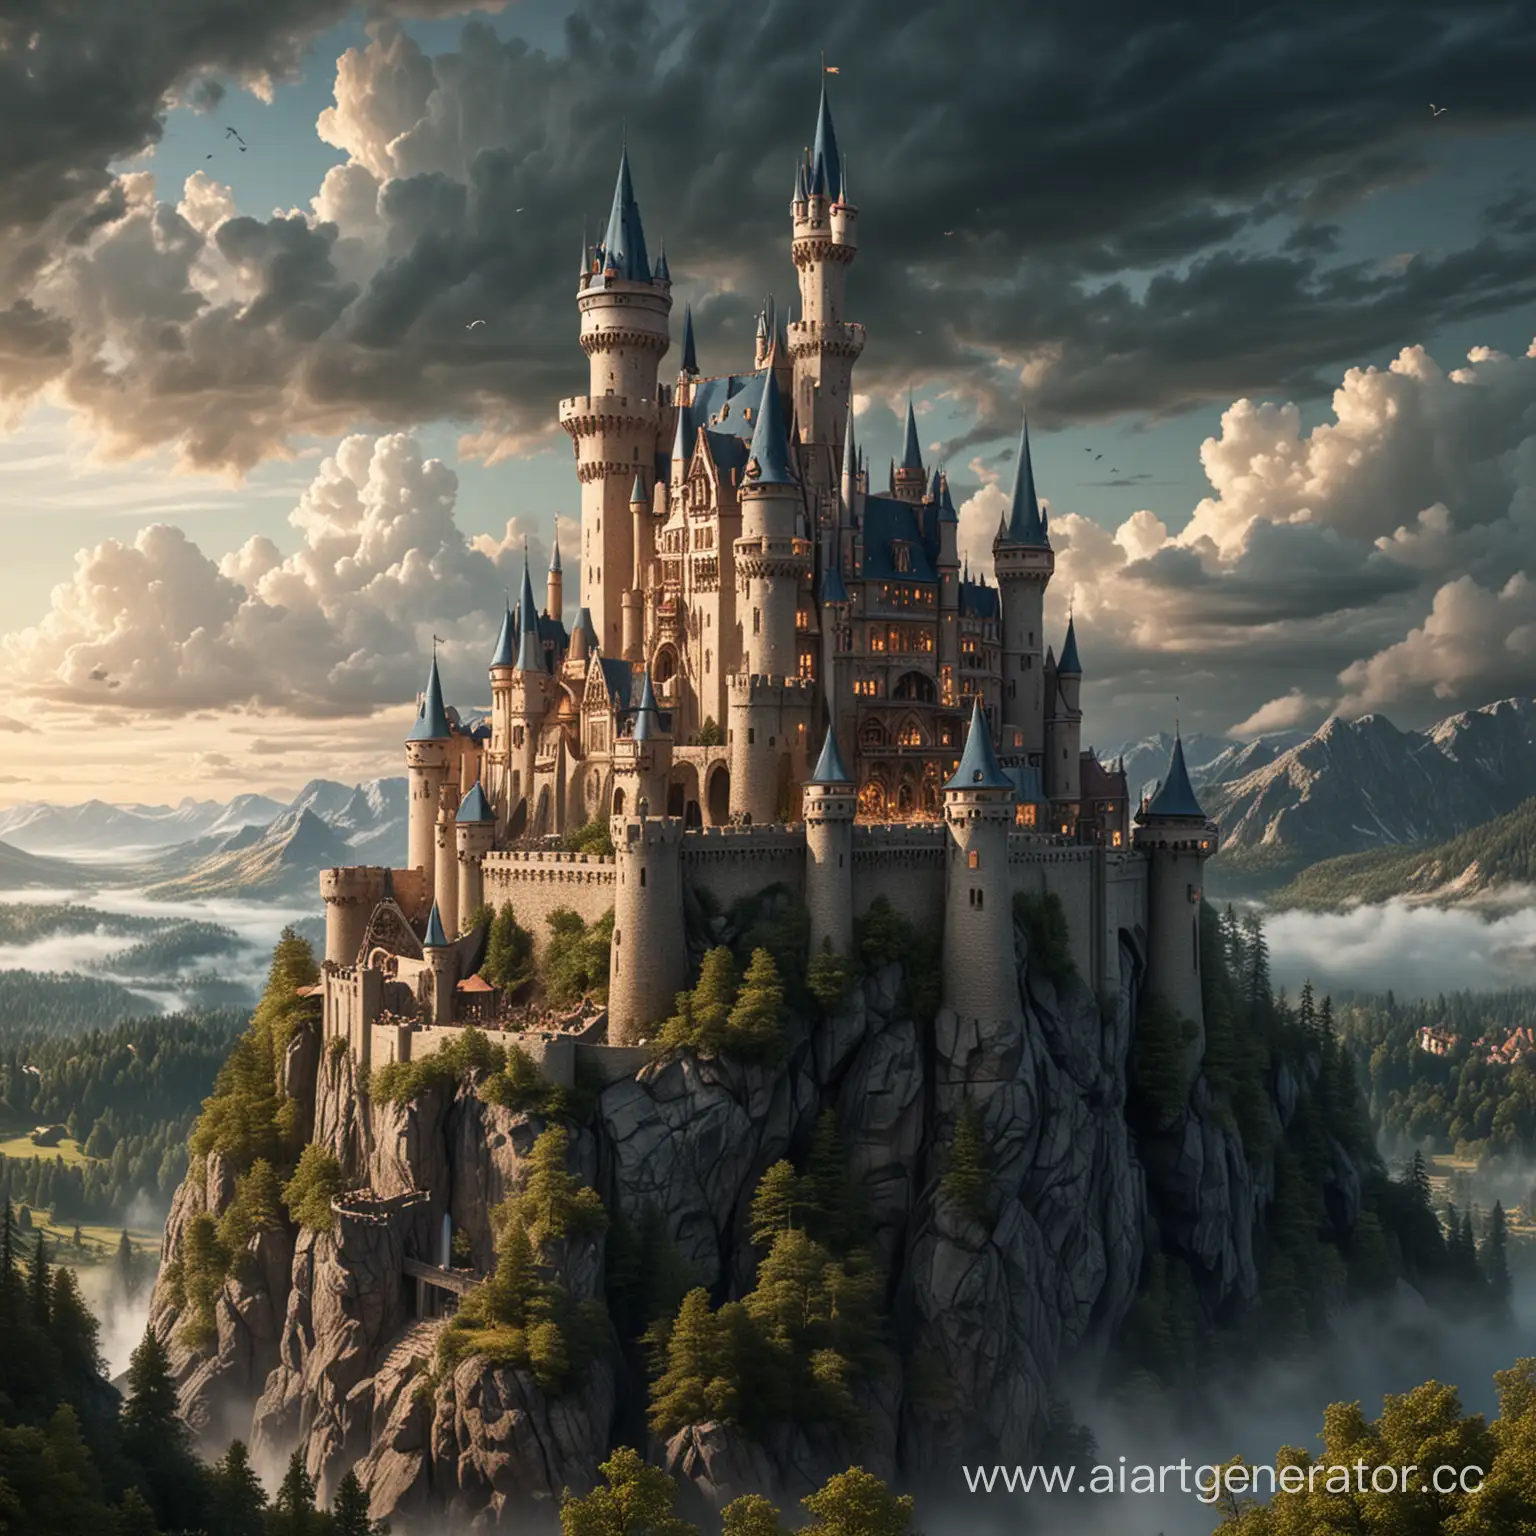 Enchanted-Castle-with-Digital-Touch-A-Fusion-of-Fairy-Tale-Magic-and-Computer-Science